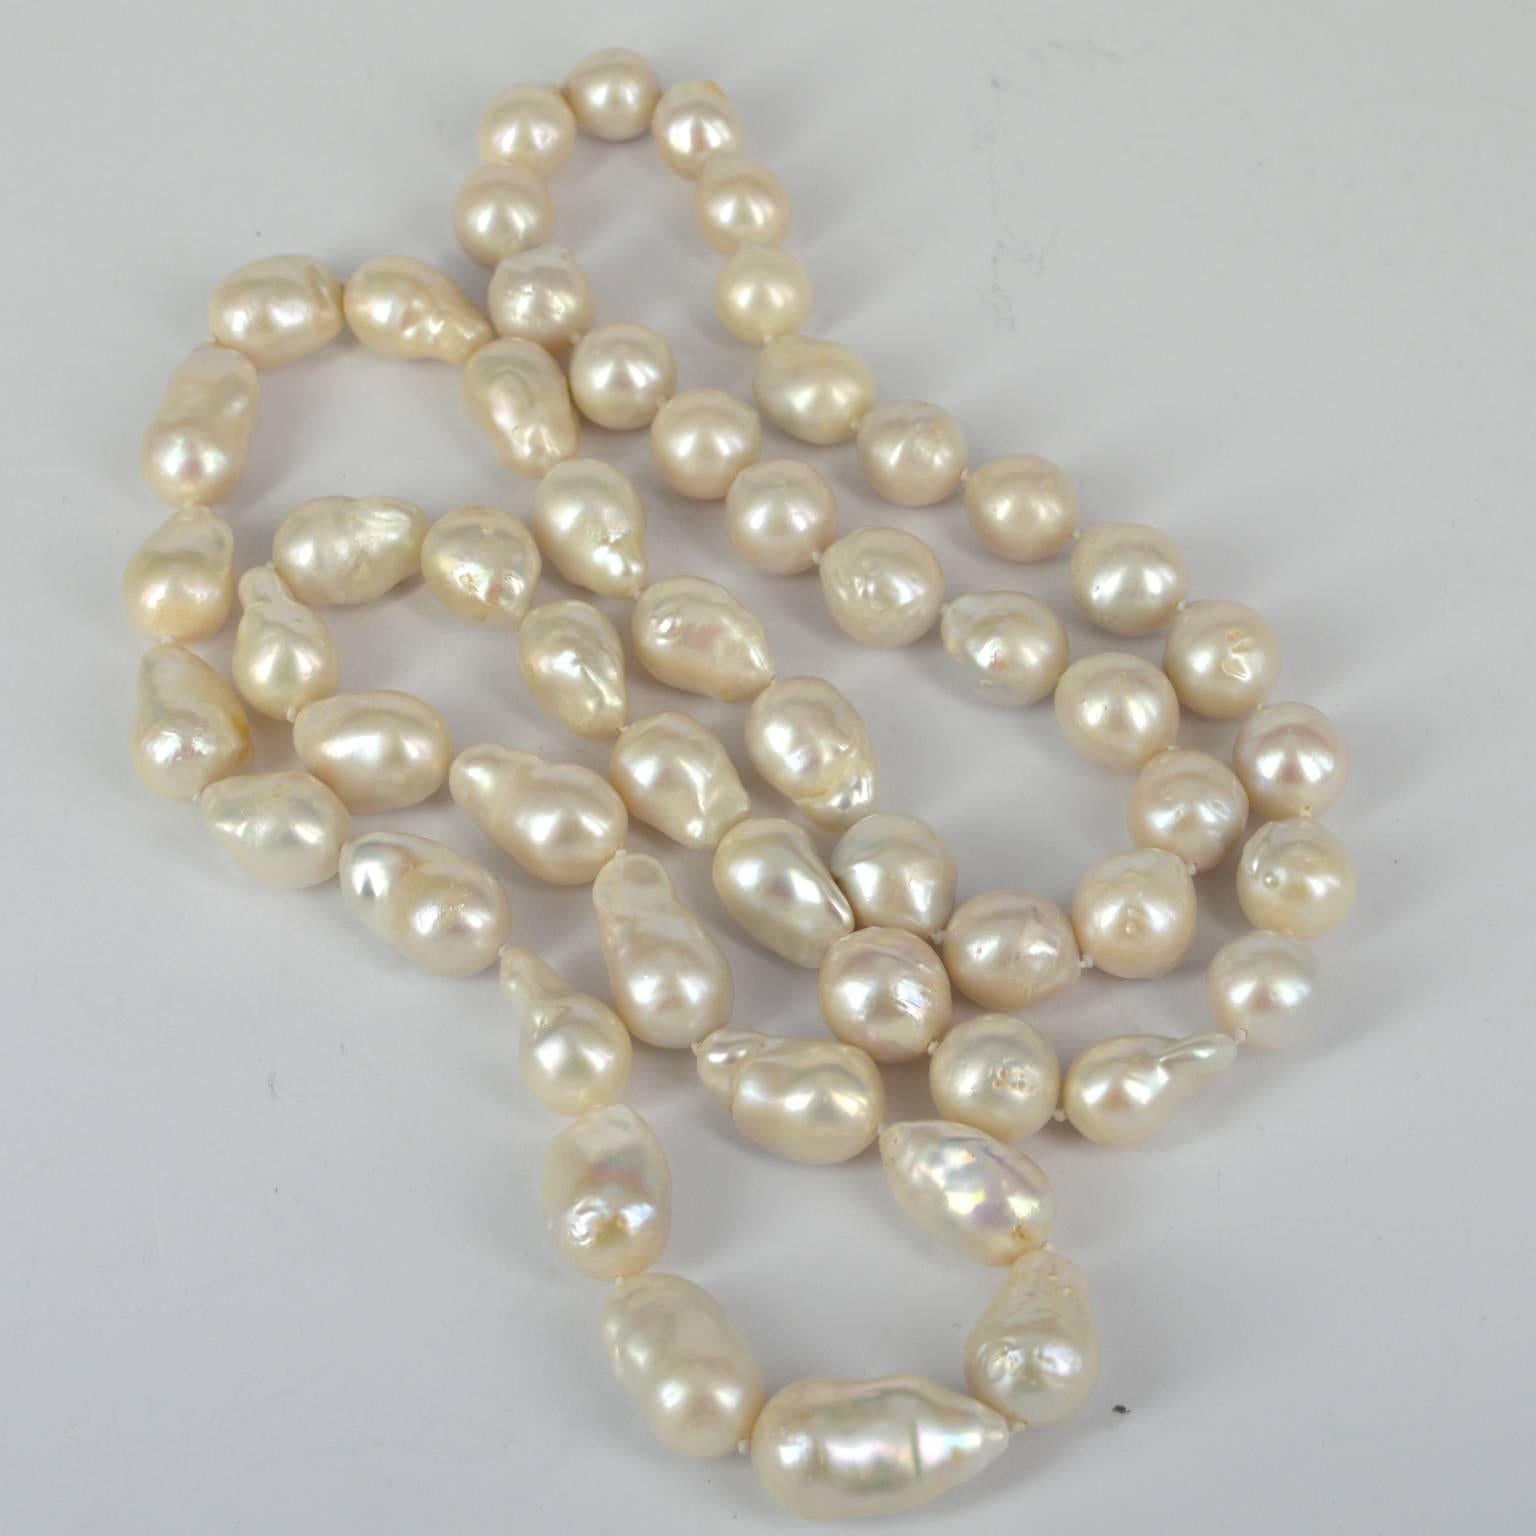 High quality natural Fresh Water Pearls graduating from 12x12mm to 15x28mm hand knotted on white thread. All Pearls are natural and are not filled or coloured.
Finished necklace measures 110cm